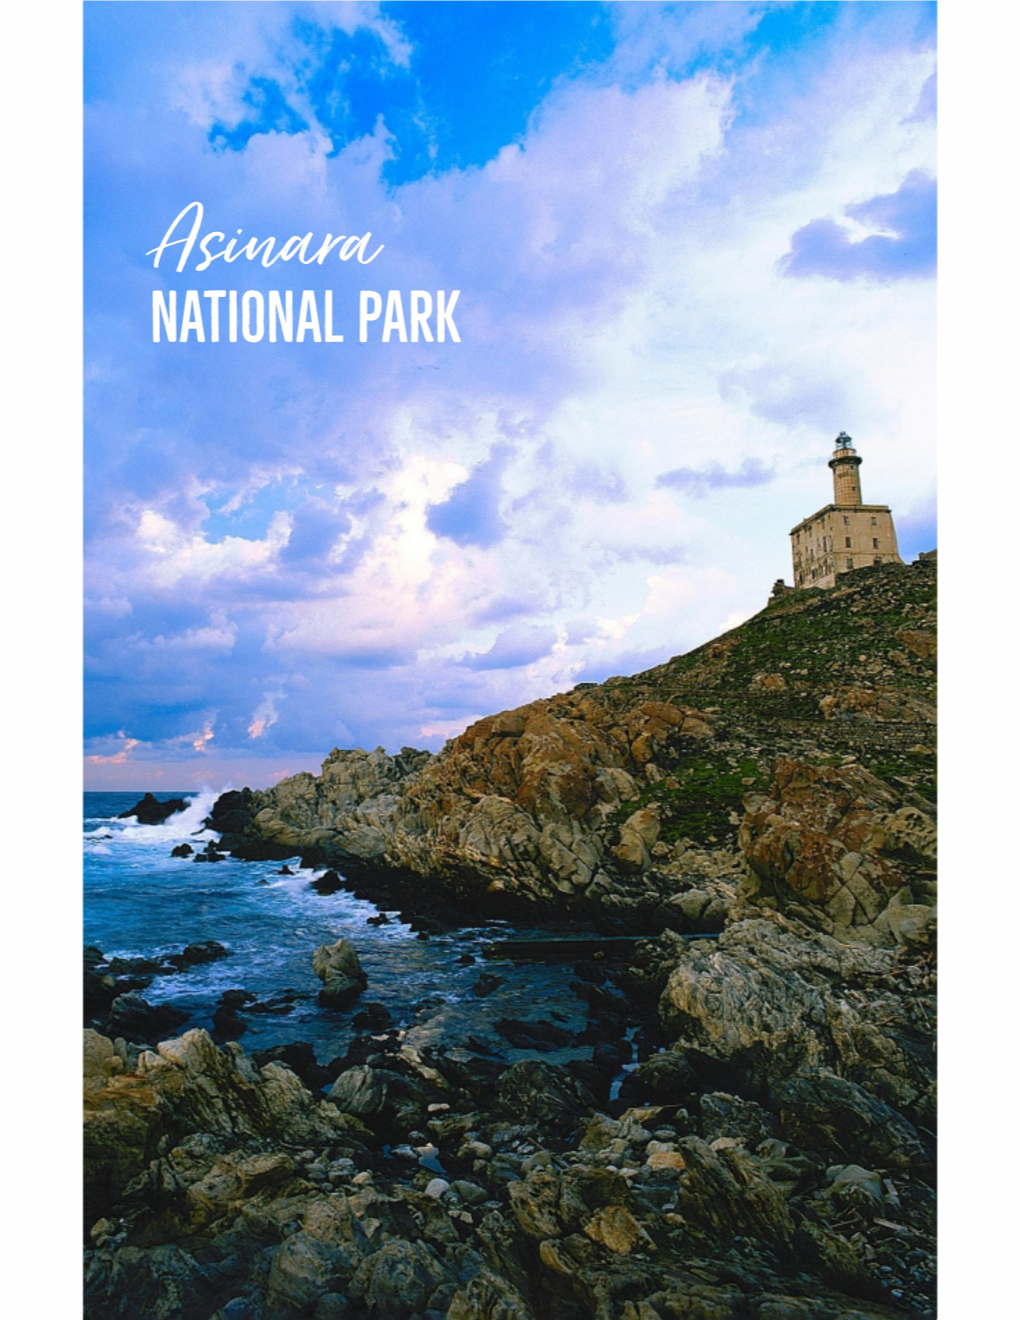 Check out Our Asinara National Park Brochure